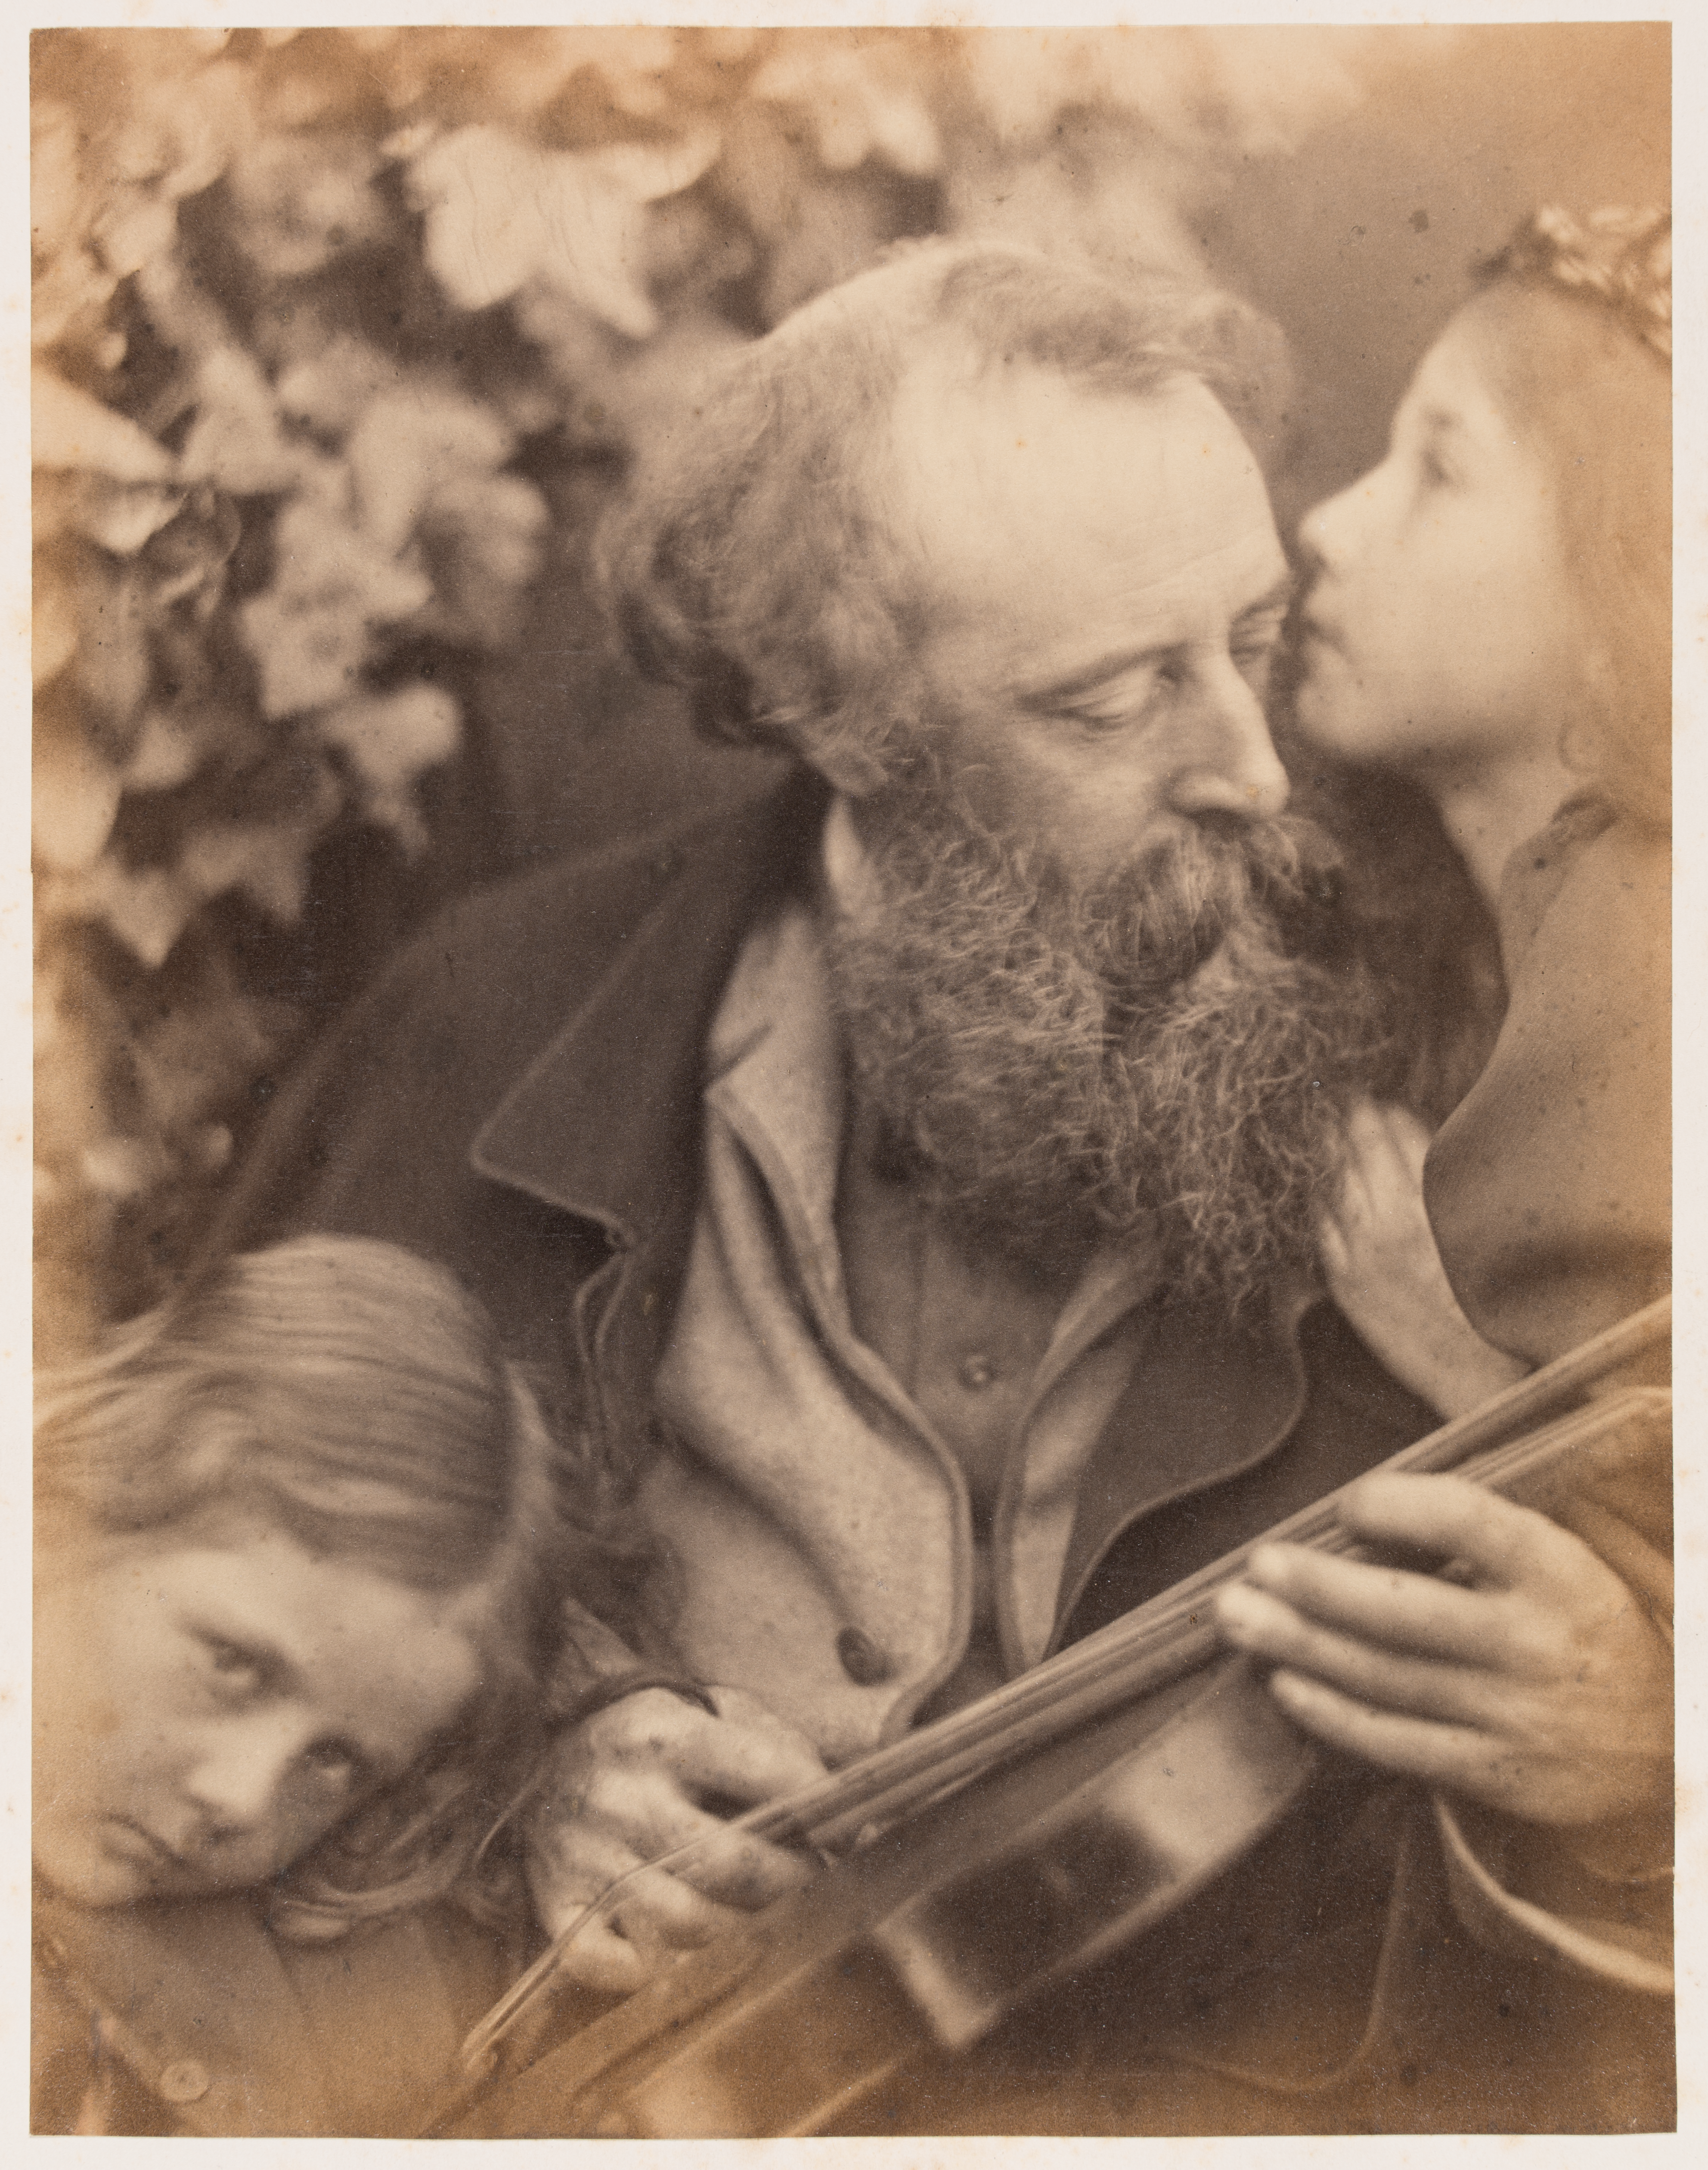 The Whisper of the Muse, by Julia Margaret Cameron © Victoria and Albert Museum, London